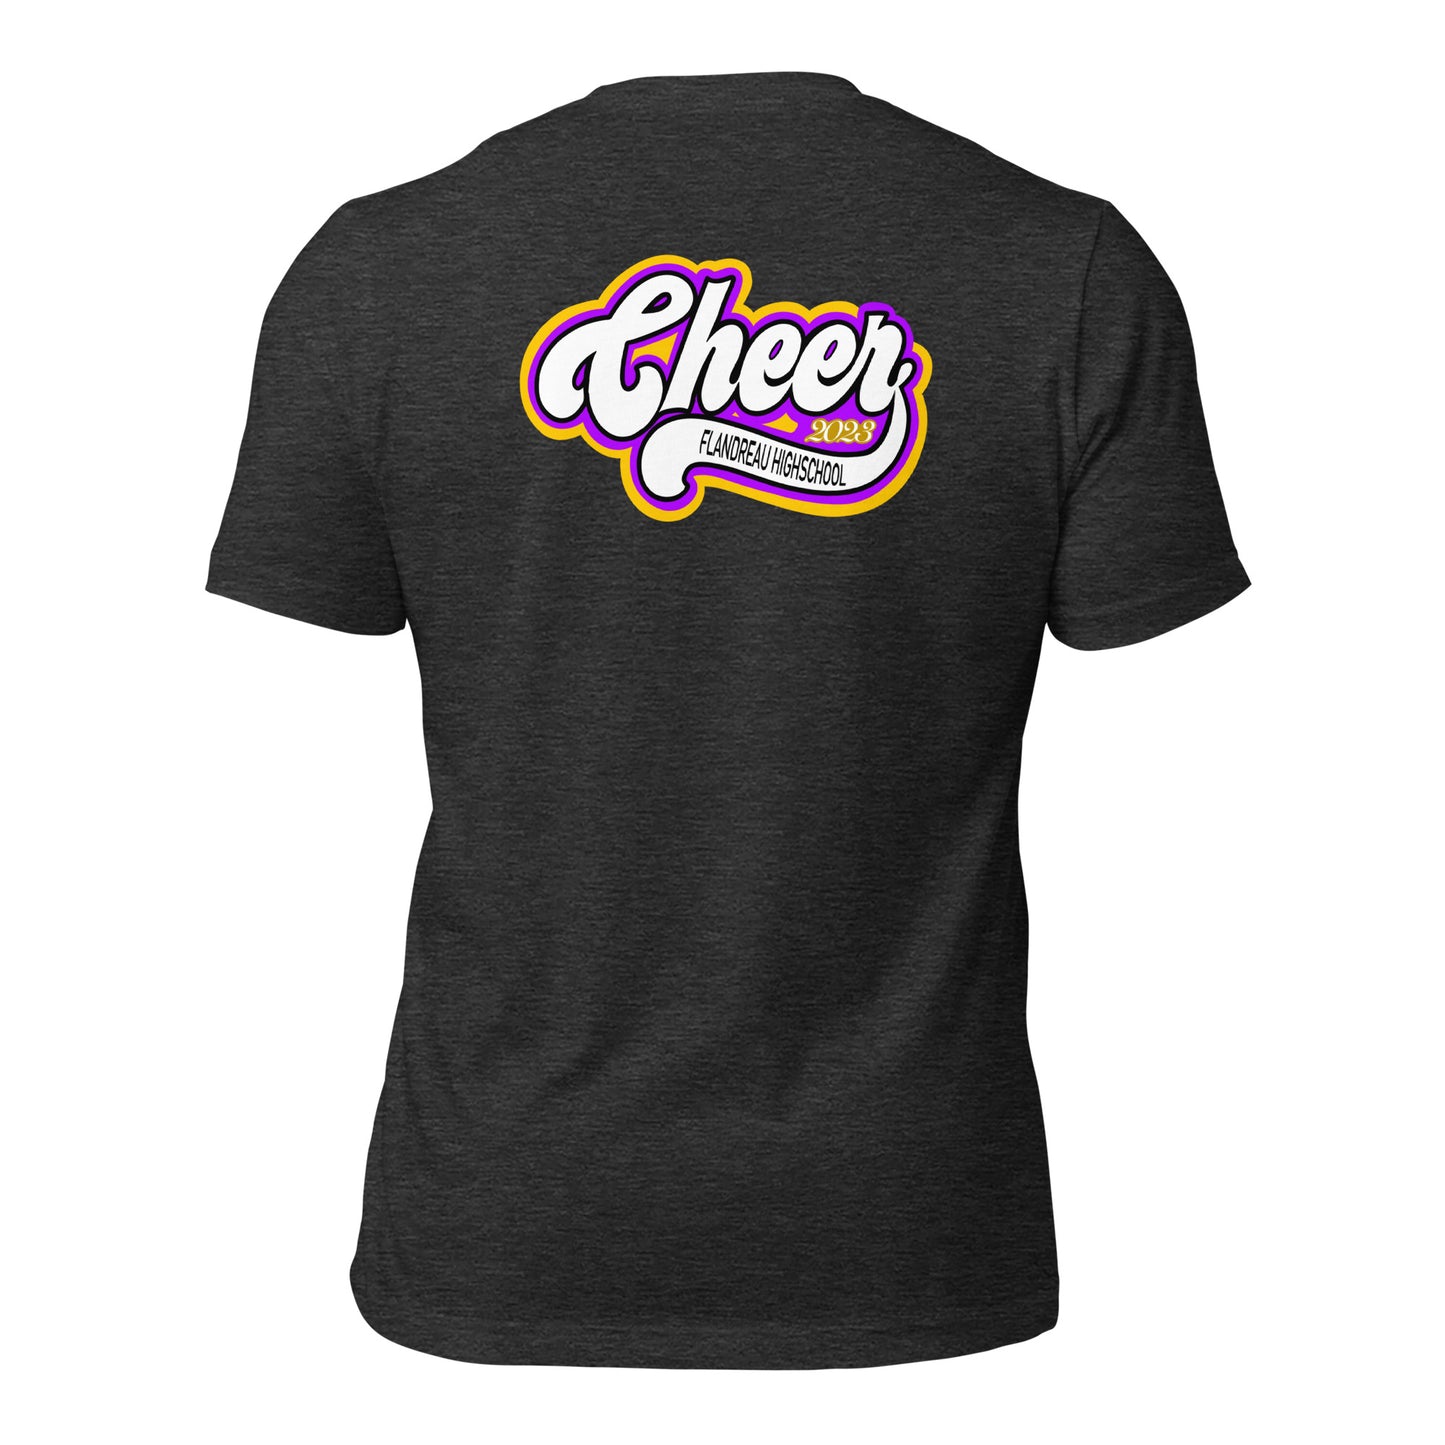 Cheer Front & Back Unisex t-shirt